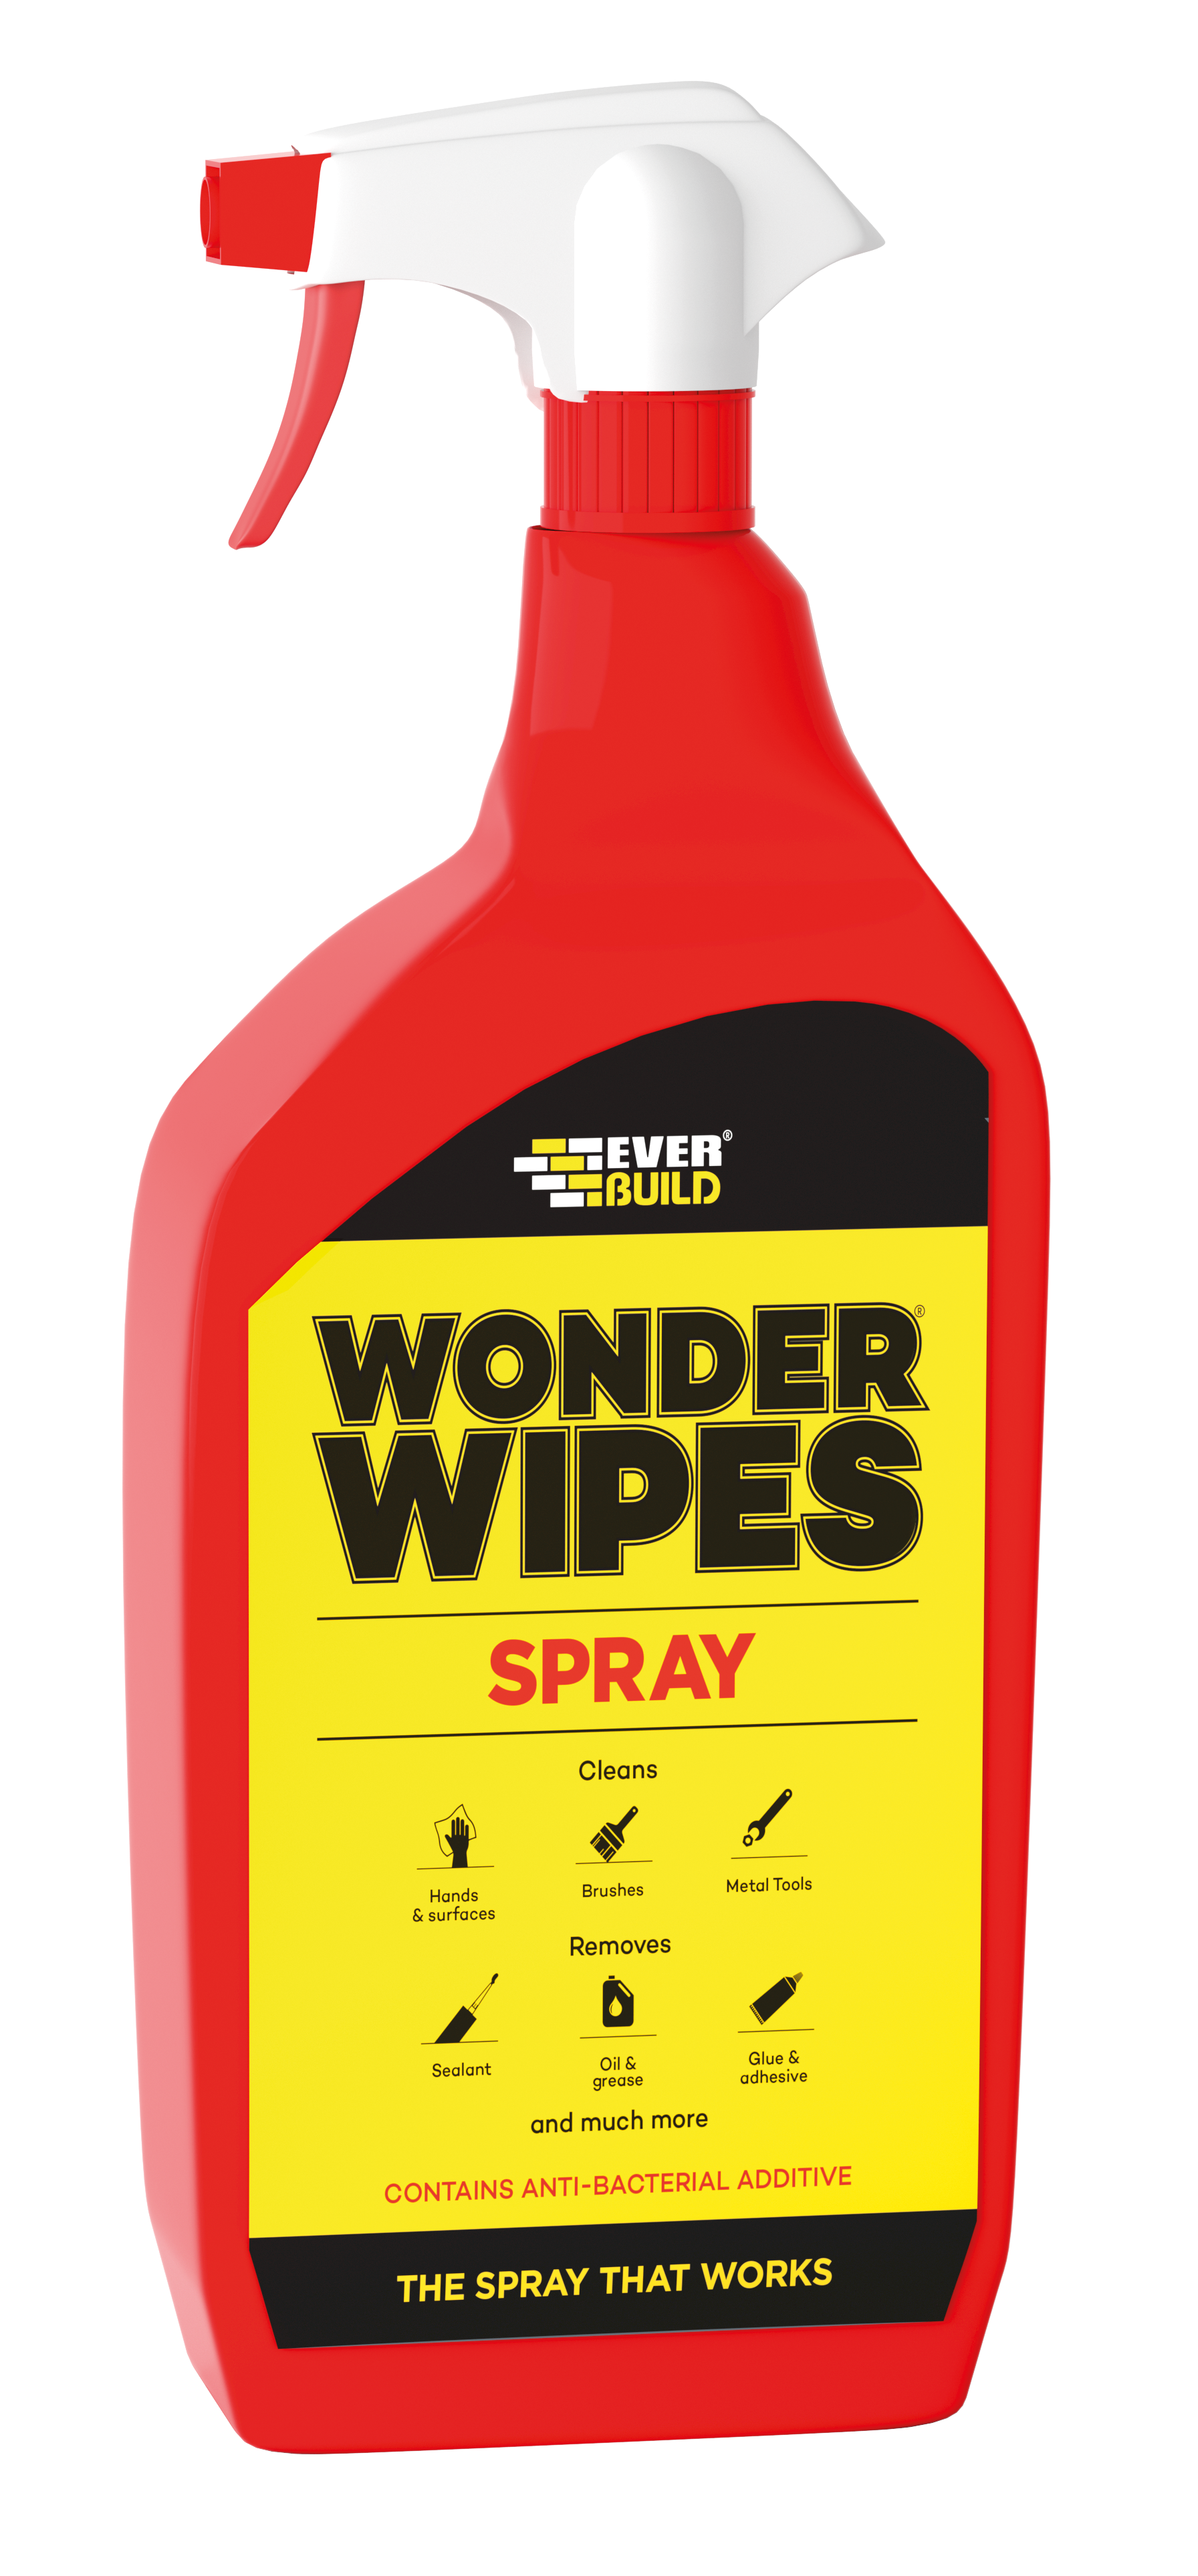 Everbuild Wonder Wipes Spray 1 Litre - NWT FM SOLUTIONS - YOUR CATERING WHOLESALER